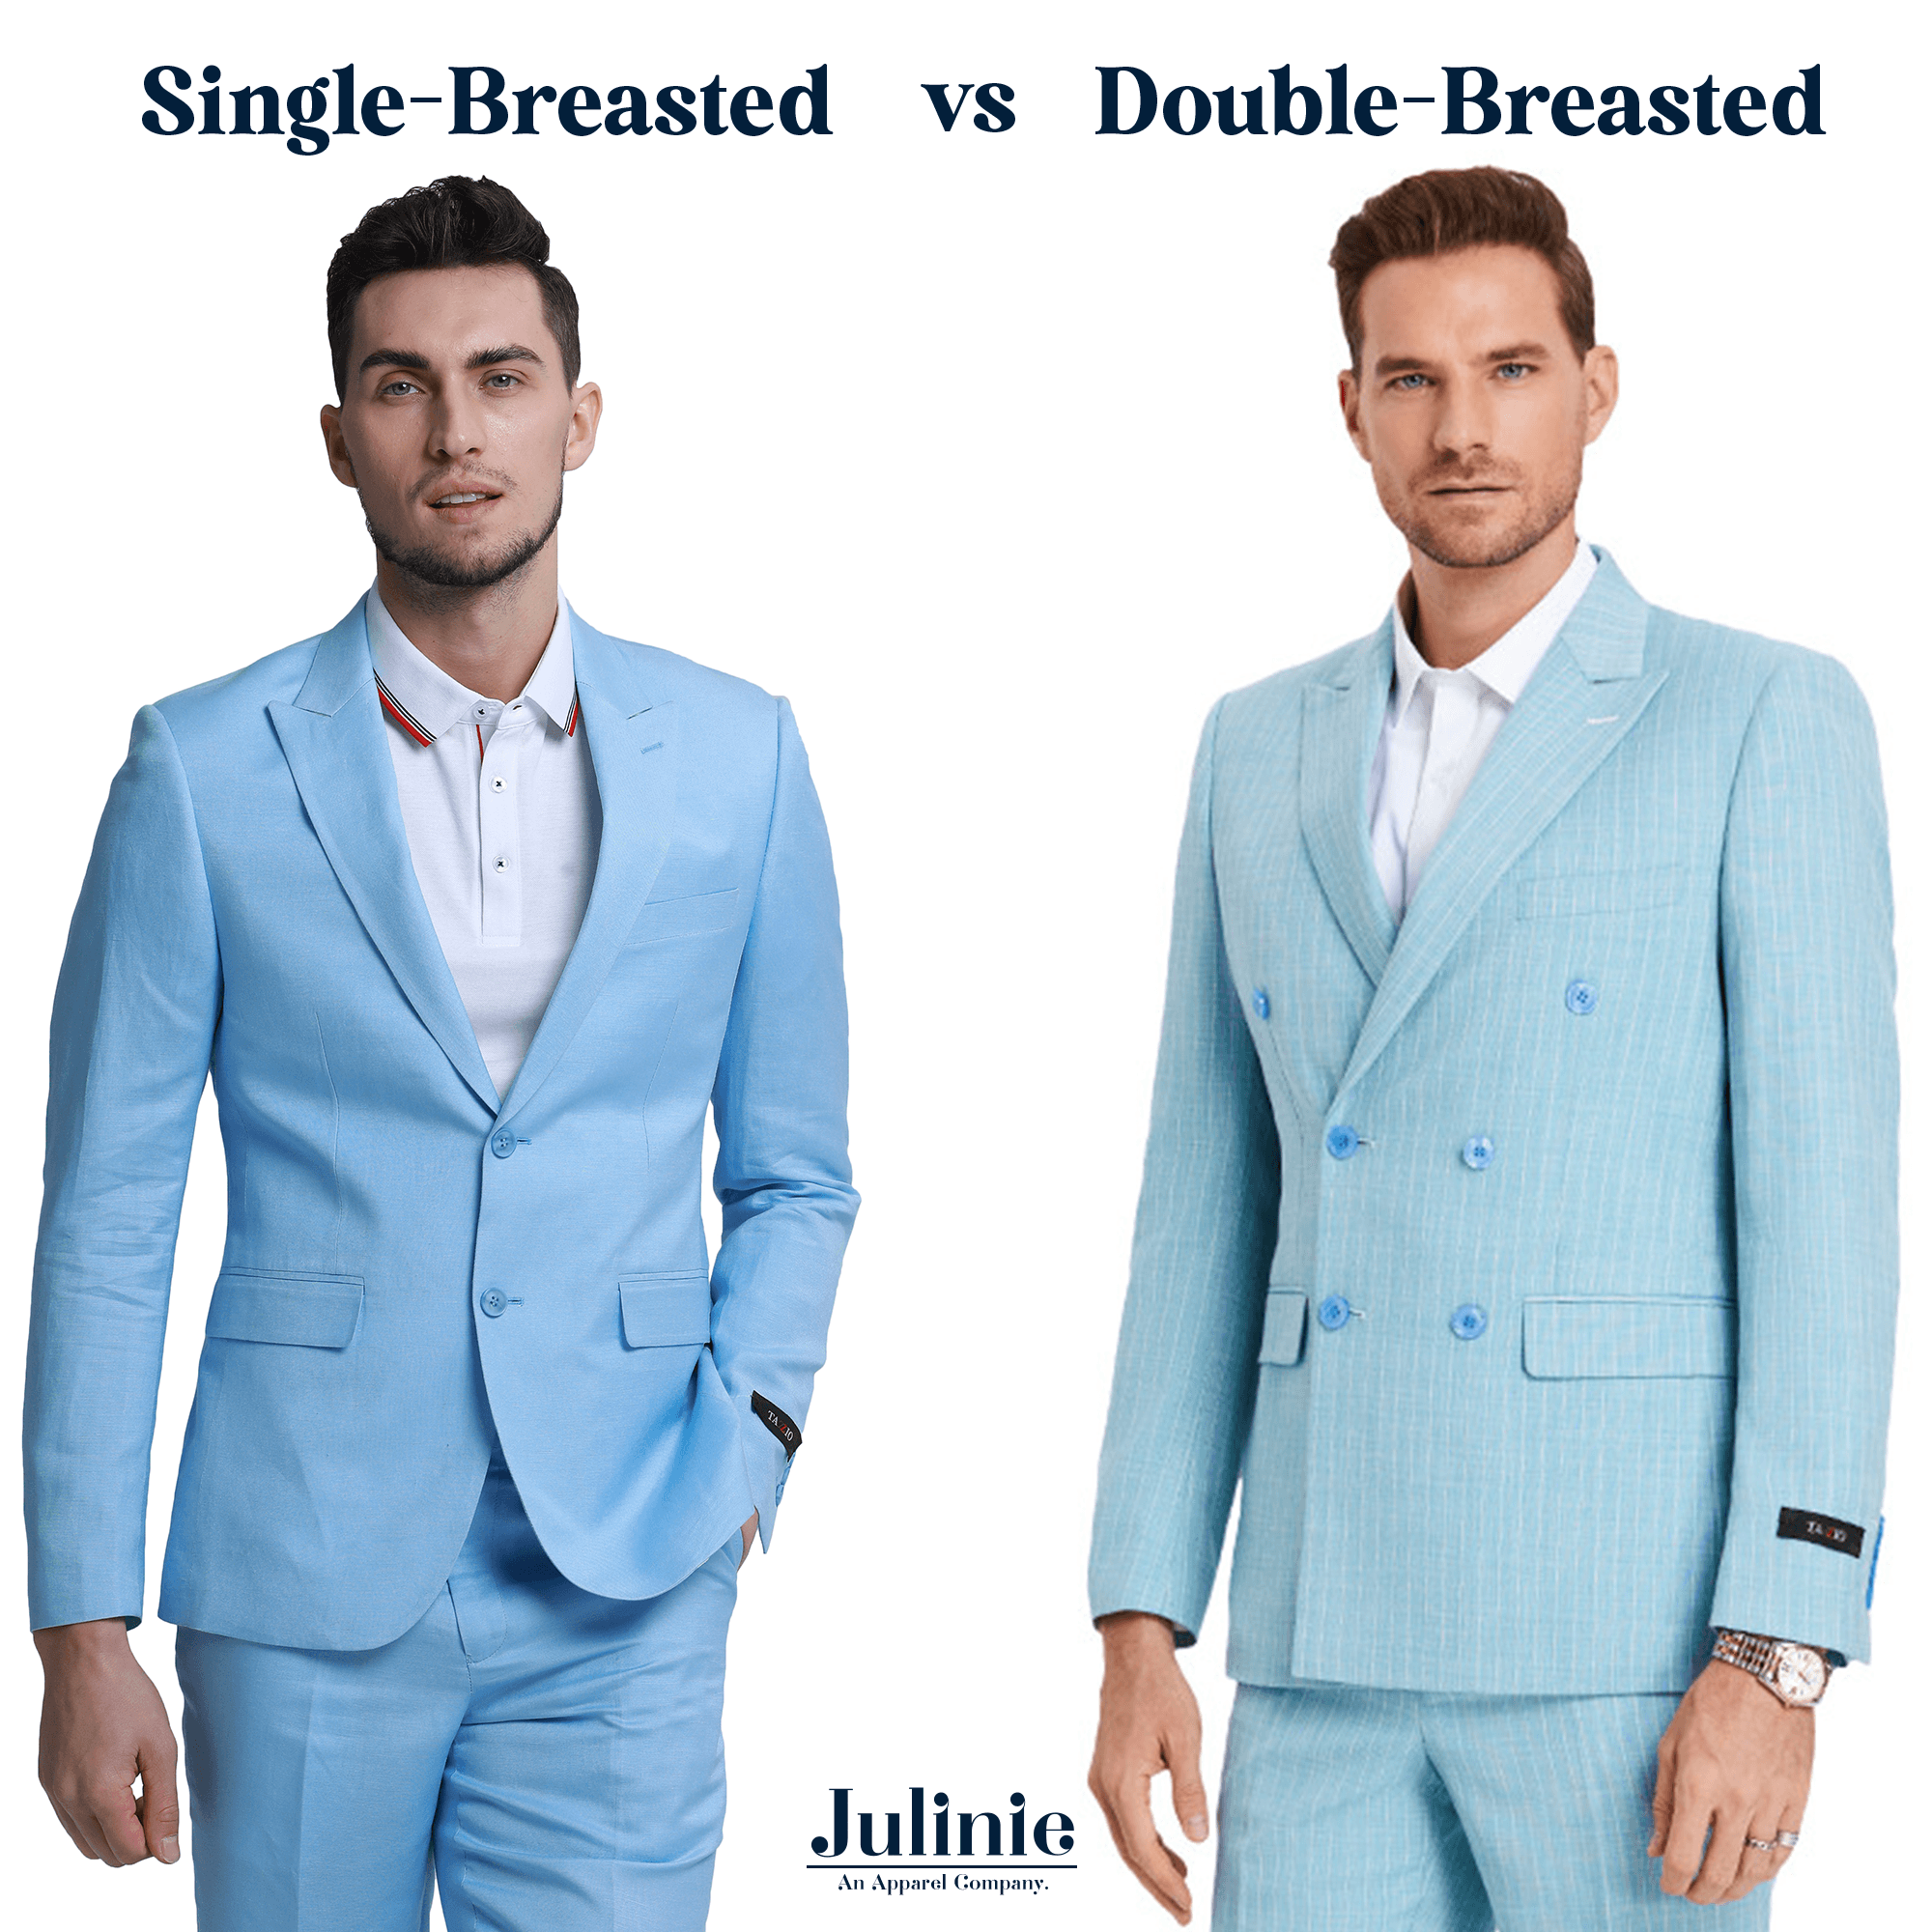 What are the differences between a Double-Breasted suit and a Single-Breasted suit? - Julinie